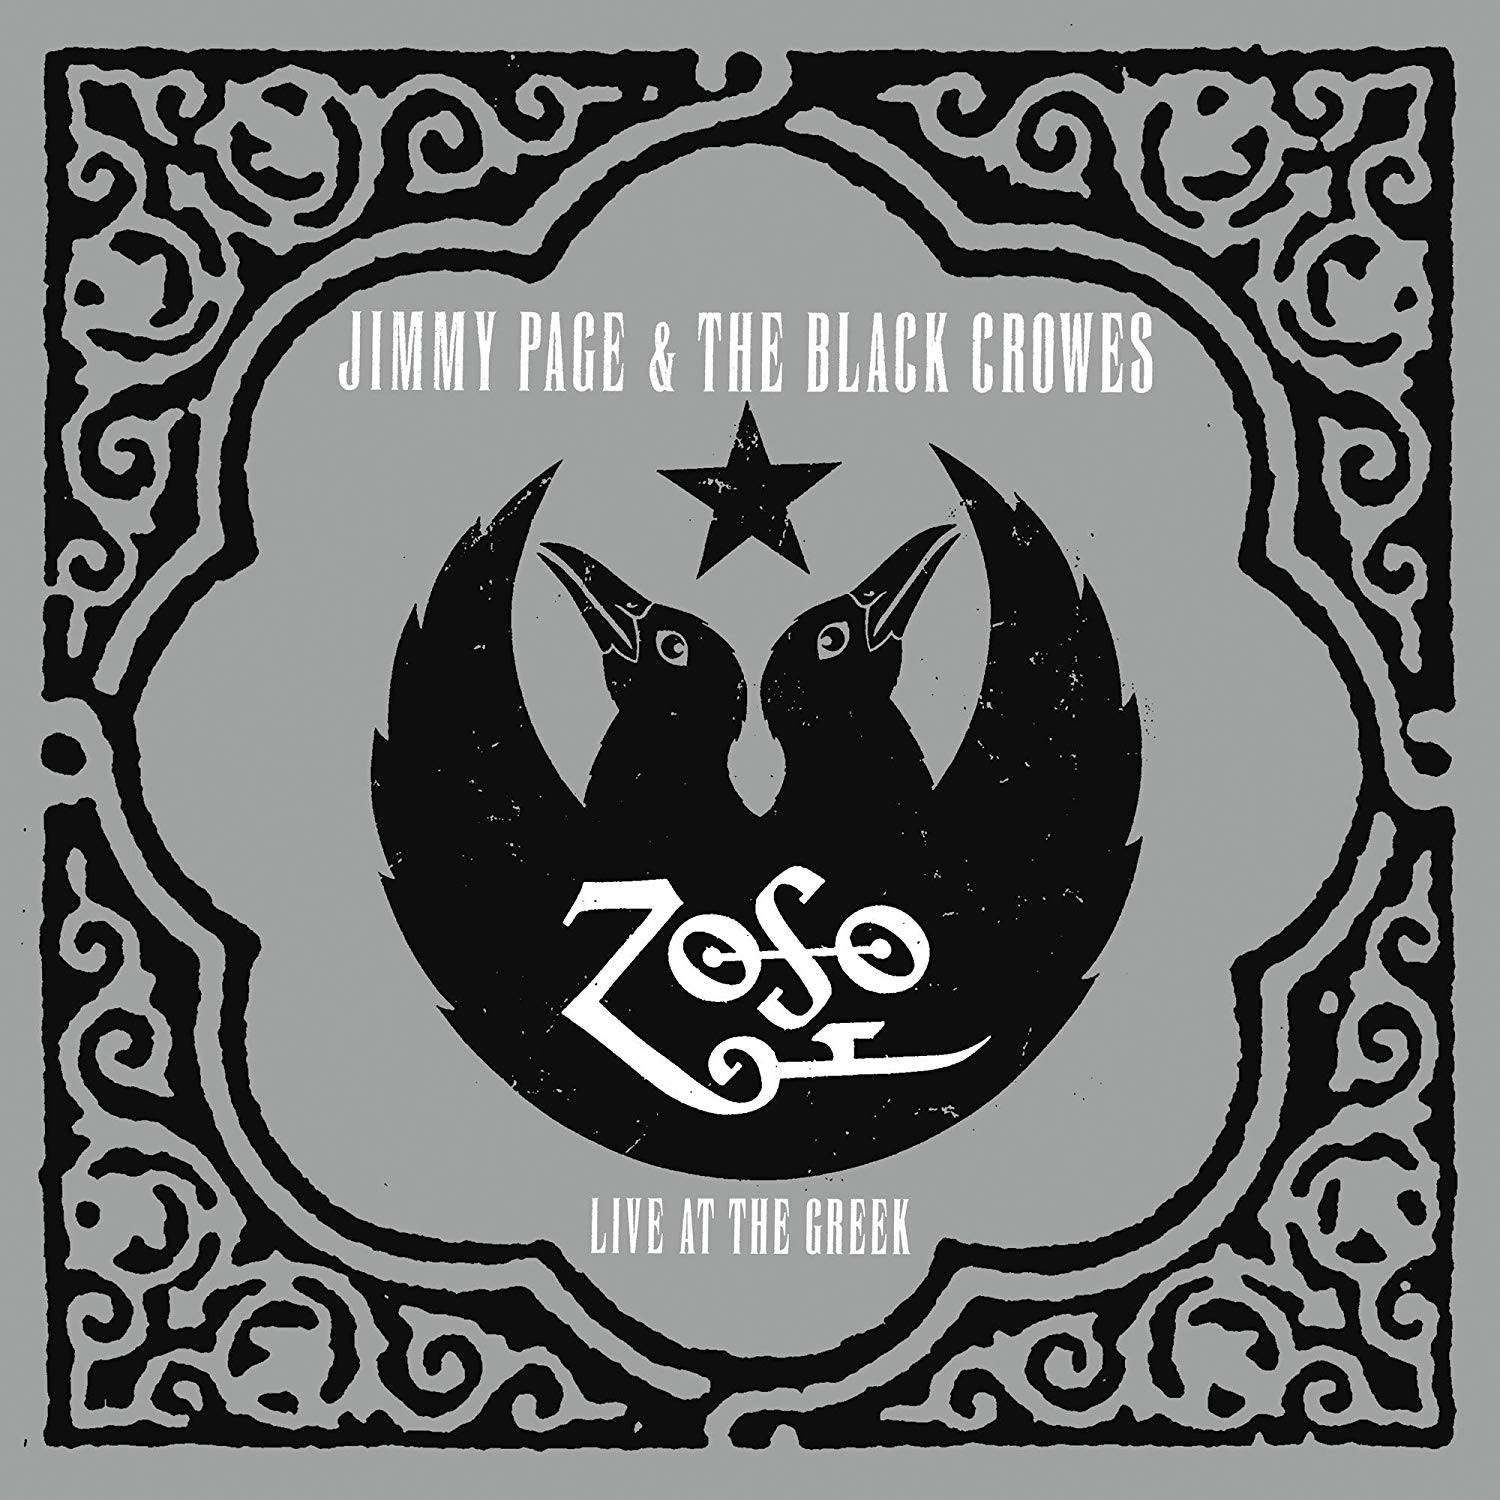 Jimmy Page & The Black Crowes - Live At The Greek (20th